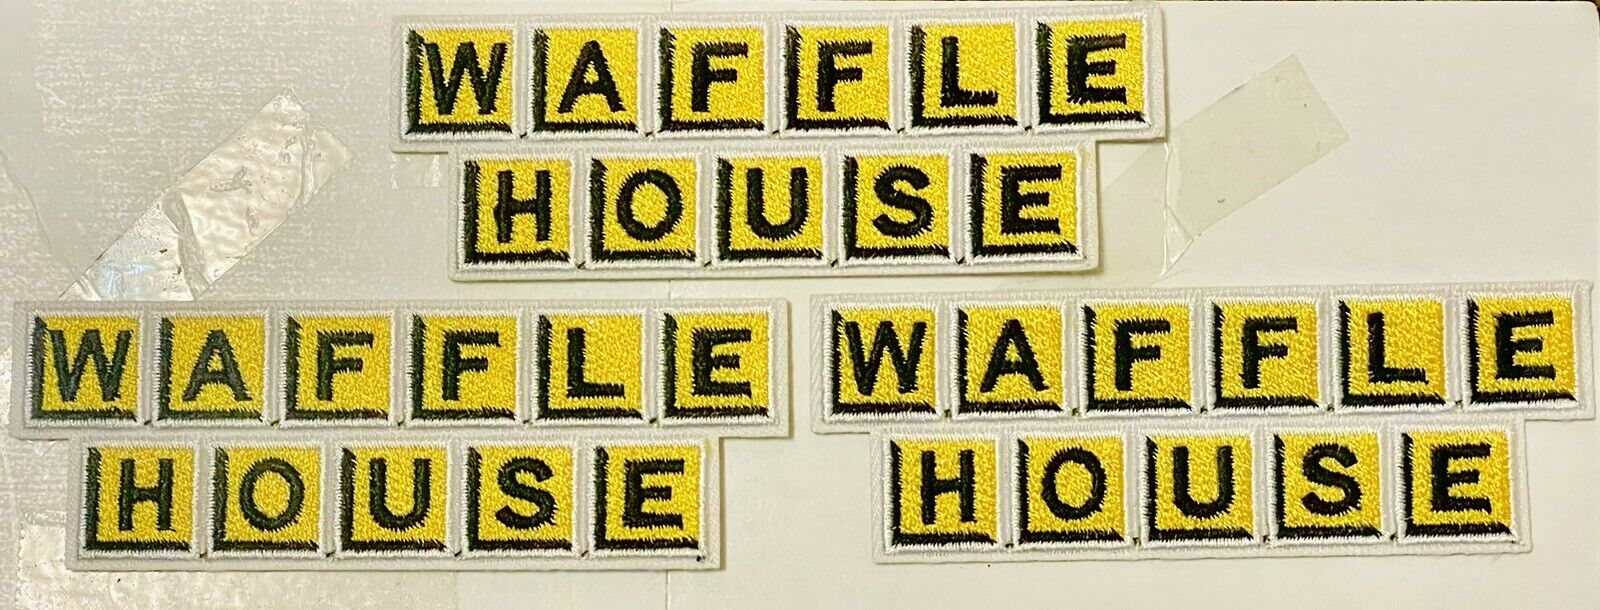 3 New Waffle House Uniform Accessories Embroidered Iron On Patches.